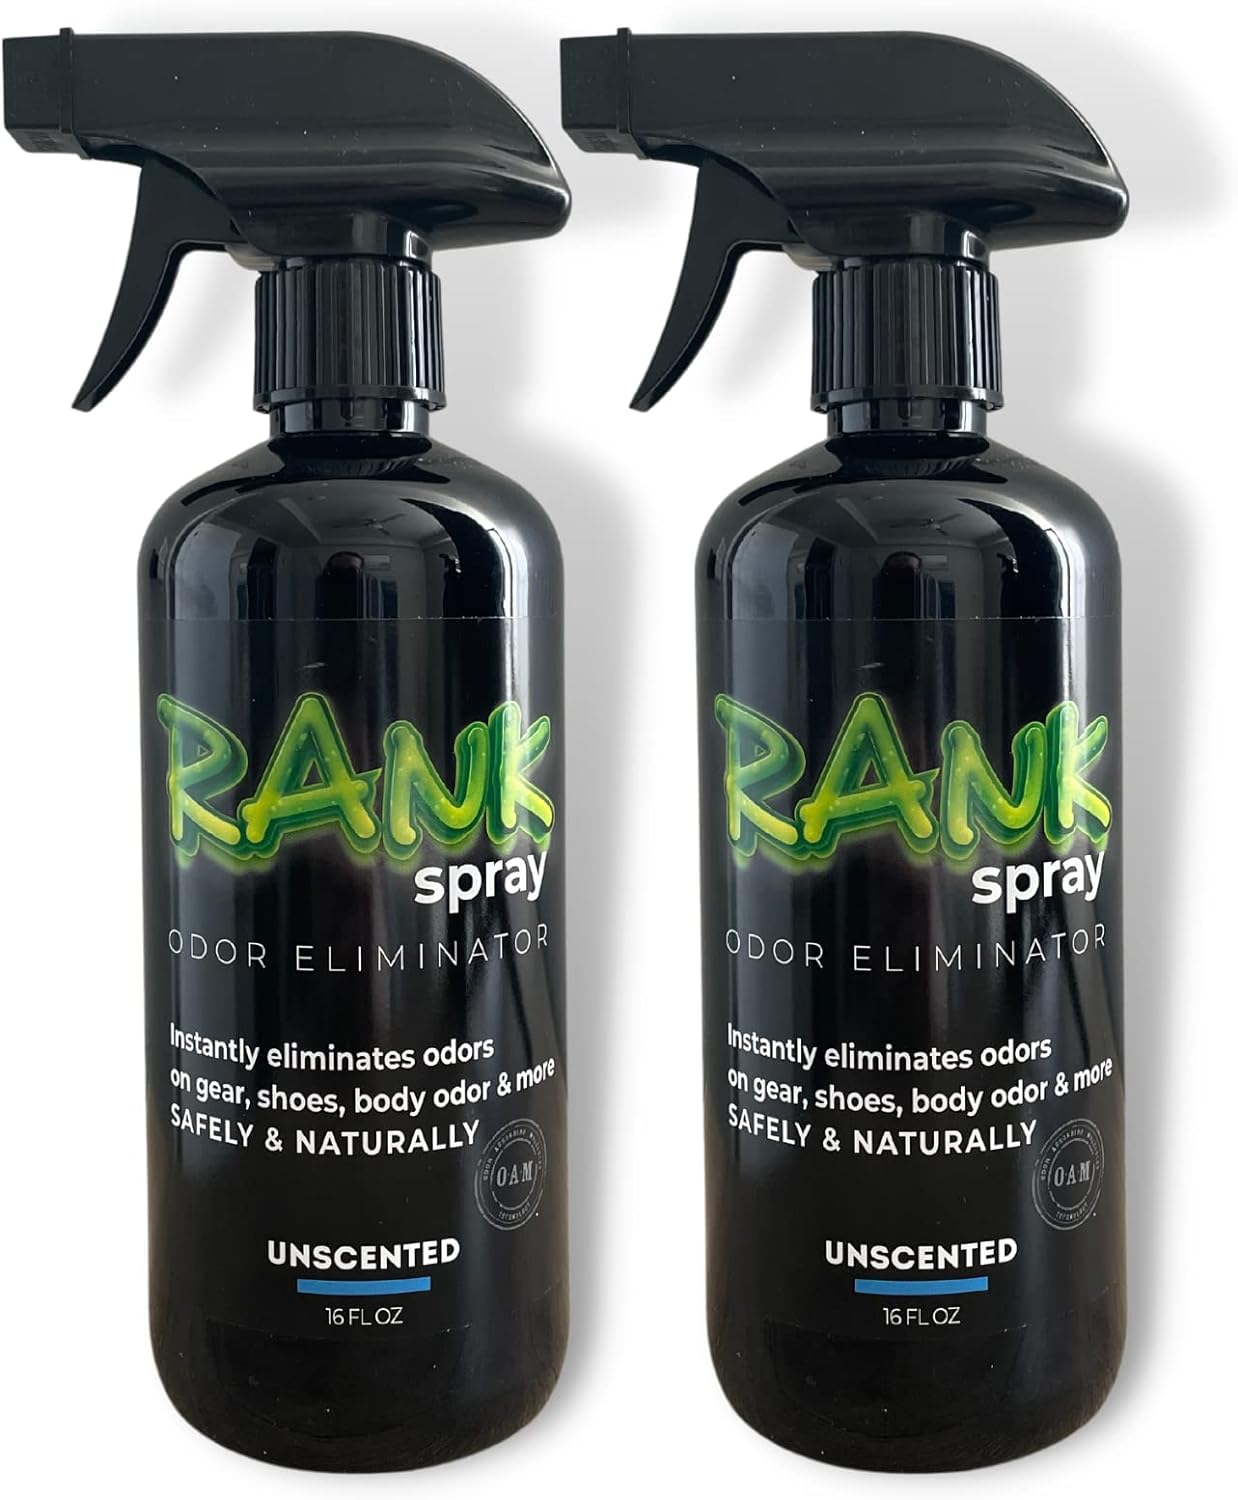 Odor Eliminator For Strong Odor: Quickly Banish Body & Sweat Odor From Boxing Gloves, Yoga Mats, Gym Bag, Hats, Cleats, & More! Safe Sports Gear Deodorizer - 2 16 oz Bottles Unscented